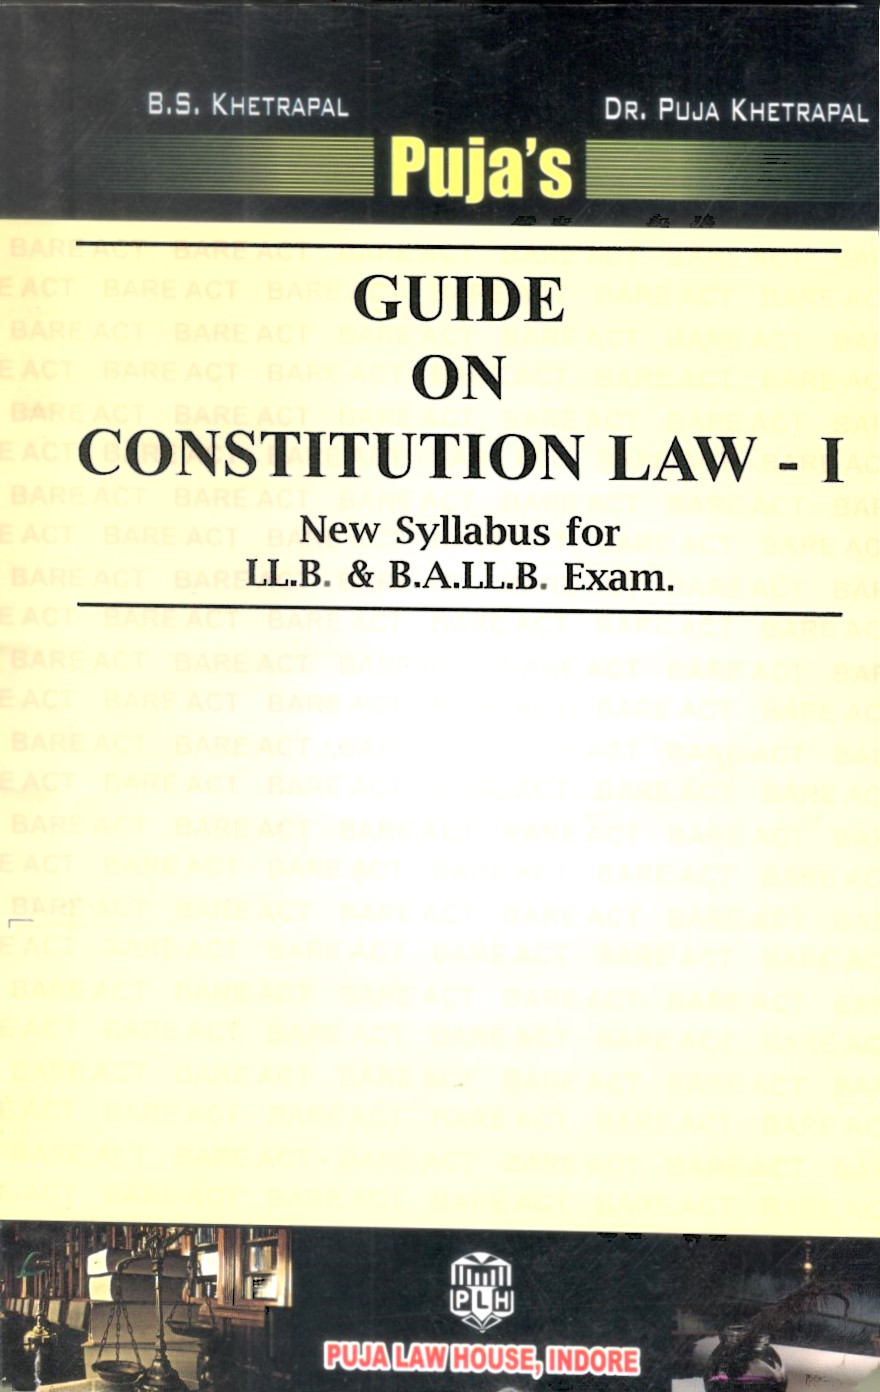 Guide on Constitution Law - I